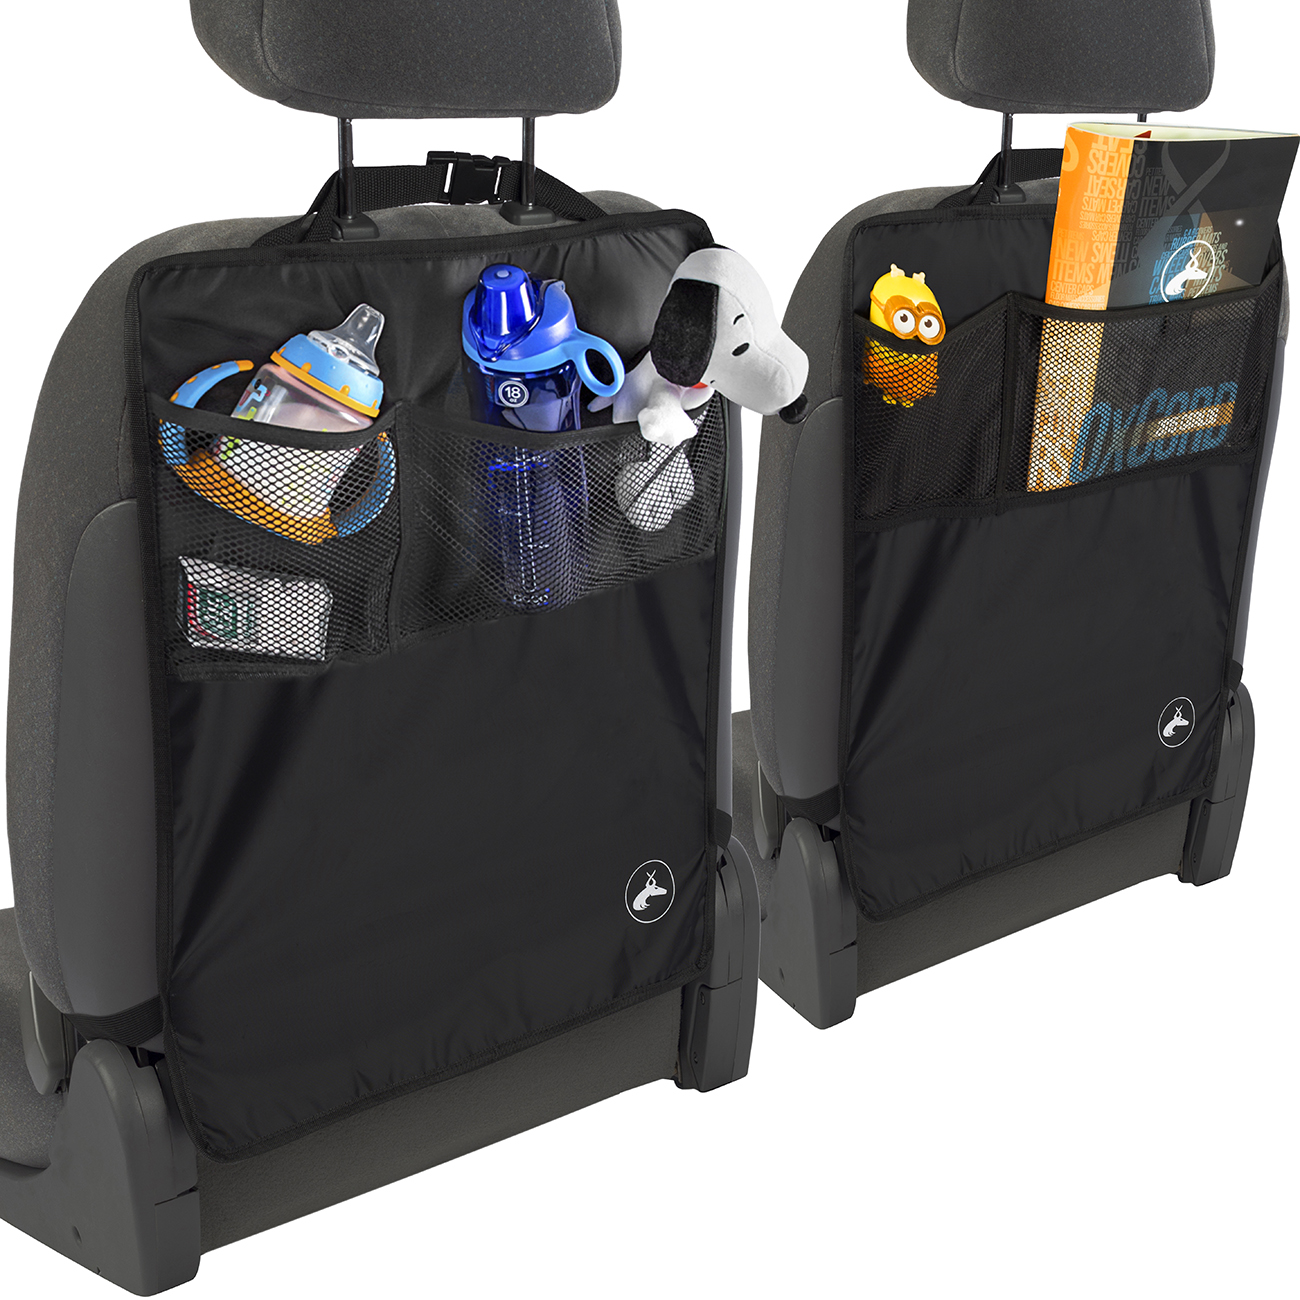 Oxgord Infant Seat Univesal Fit Protective Car Seat Cover for Car Seat, 2 Piece with Storage Pockets, Black - image 1 of 4